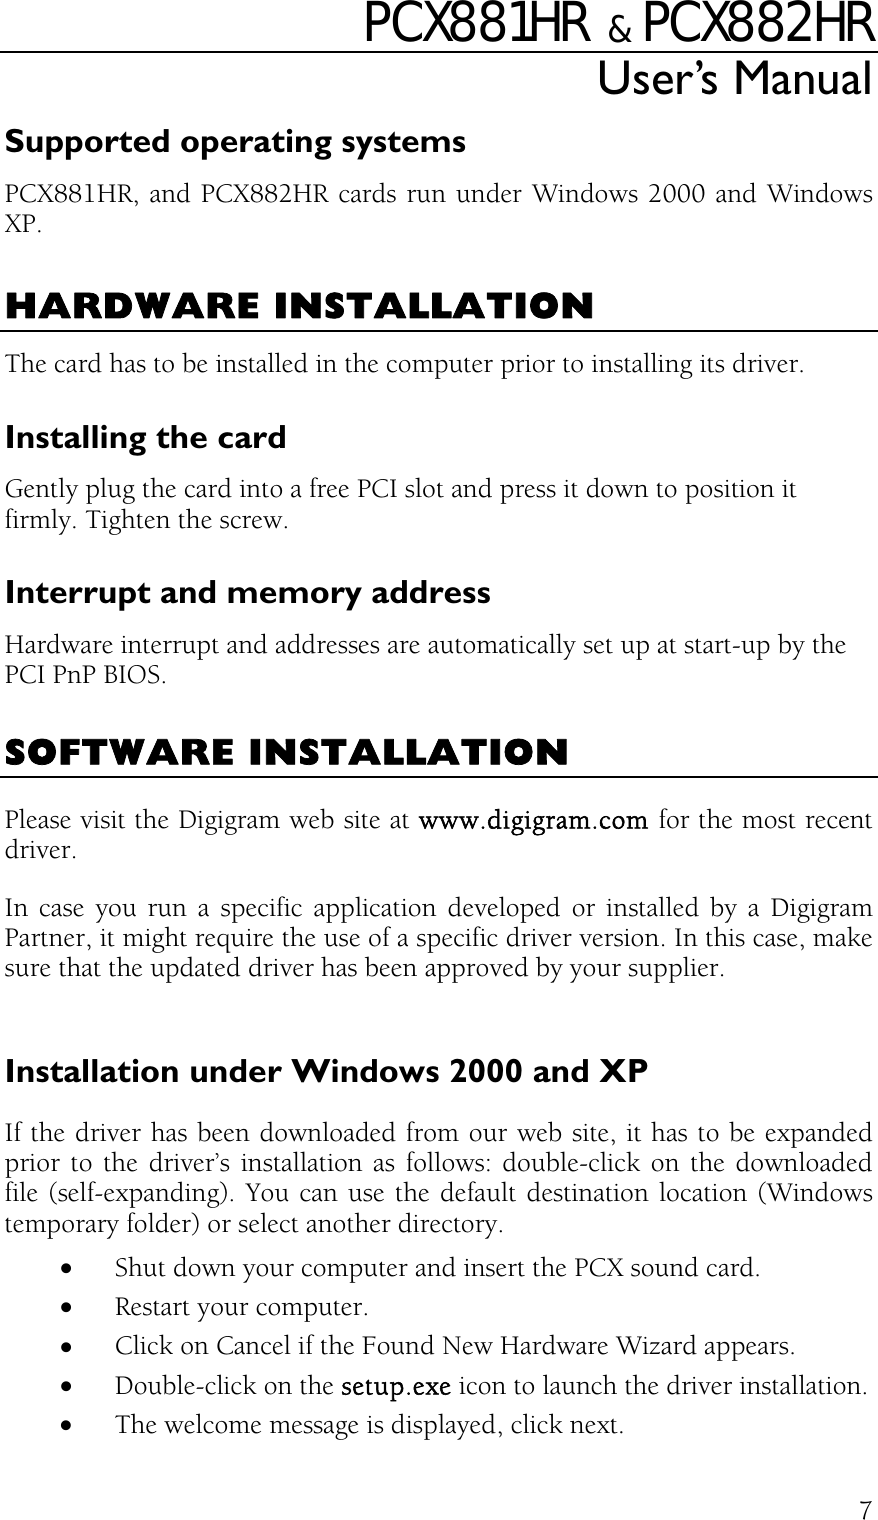 PCX881HR   &amp;  PCX882HR User’s Manual  7Supported operating systems PCX881HR, and PCX882HR cards run under Windows 2000 and Windows XP.  HARDWARE INSTALLATION The card has to be installed in the computer prior to installing its driver. Installing the card Gently plug the card into a free PCI slot and press it down to position it firmly. Tighten the screw. Interrupt and memory address Hardware interrupt and addresses are automatically set up at start-up by the PCI PnP BIOS.  SOFTWARE INSTALLATION Please visit the Digigram web site at www.digigram.com for the most recent driver. In case you run a specific application developed or installed by a Digigram Partner, it might require the use of a specific driver version. In this case, make sure that the updated driver has been approved by your supplier.  Installation under Windows 2000 and XP If the driver has been downloaded from our web site, it has to be expanded prior to the driver’s installation as follows: double-click on the downloaded file (self-expanding). You can use the default destination location (Windows temporary folder) or select another directory. •  Shut down your computer and insert the PCX sound card. •  Restart your computer. •  Click on Cancel if the Found New Hardware Wizard appears. •  Double-click on the setup.exe icon to launch the driver installation. •  The welcome message is displayed, click next. 